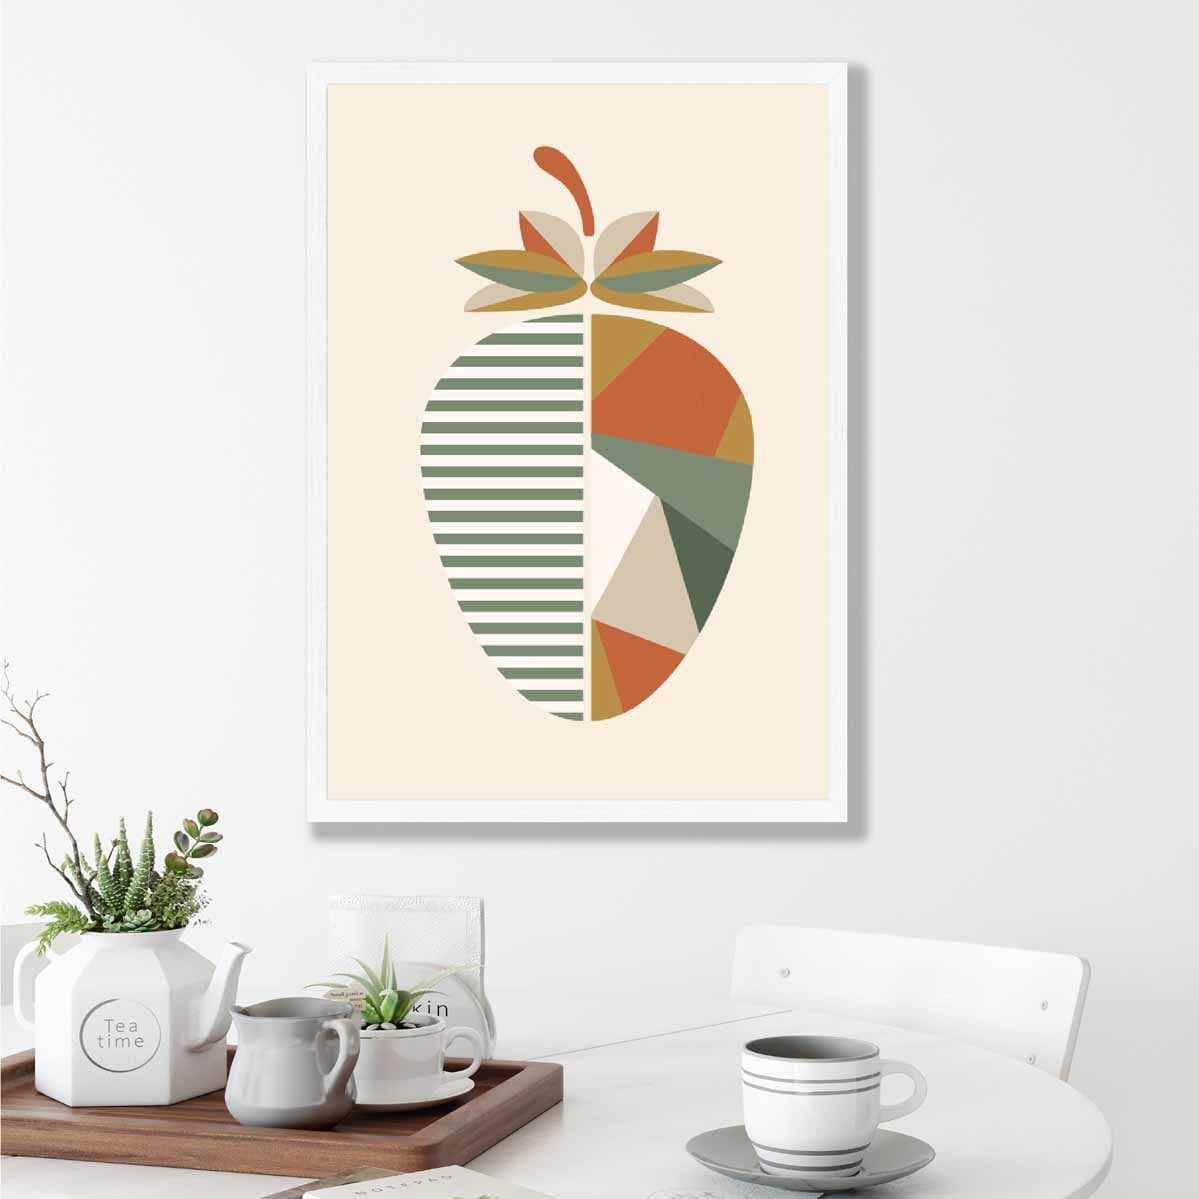 Geometric Fruit Poster of a Strawberry in Green Orange Yellow